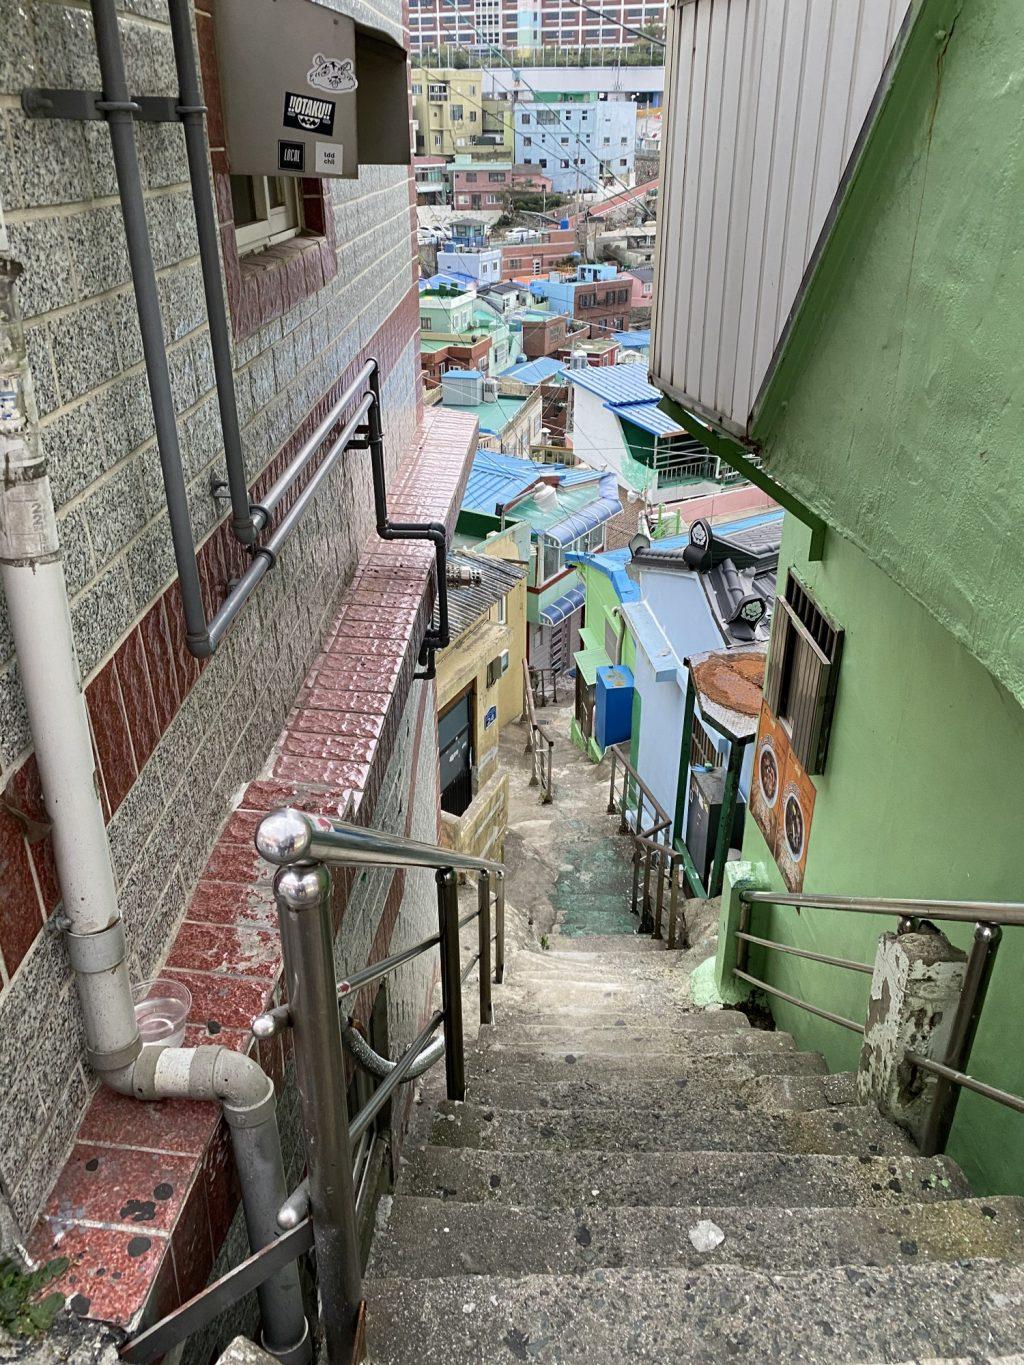 The stairs at Gamcheon Culture Village in Busan form a zigzag pathway with added handrails between colorful walls. Although this village is typically bustling with tourists and activities, it was much quieter and vacant when I visited Oct. 4.